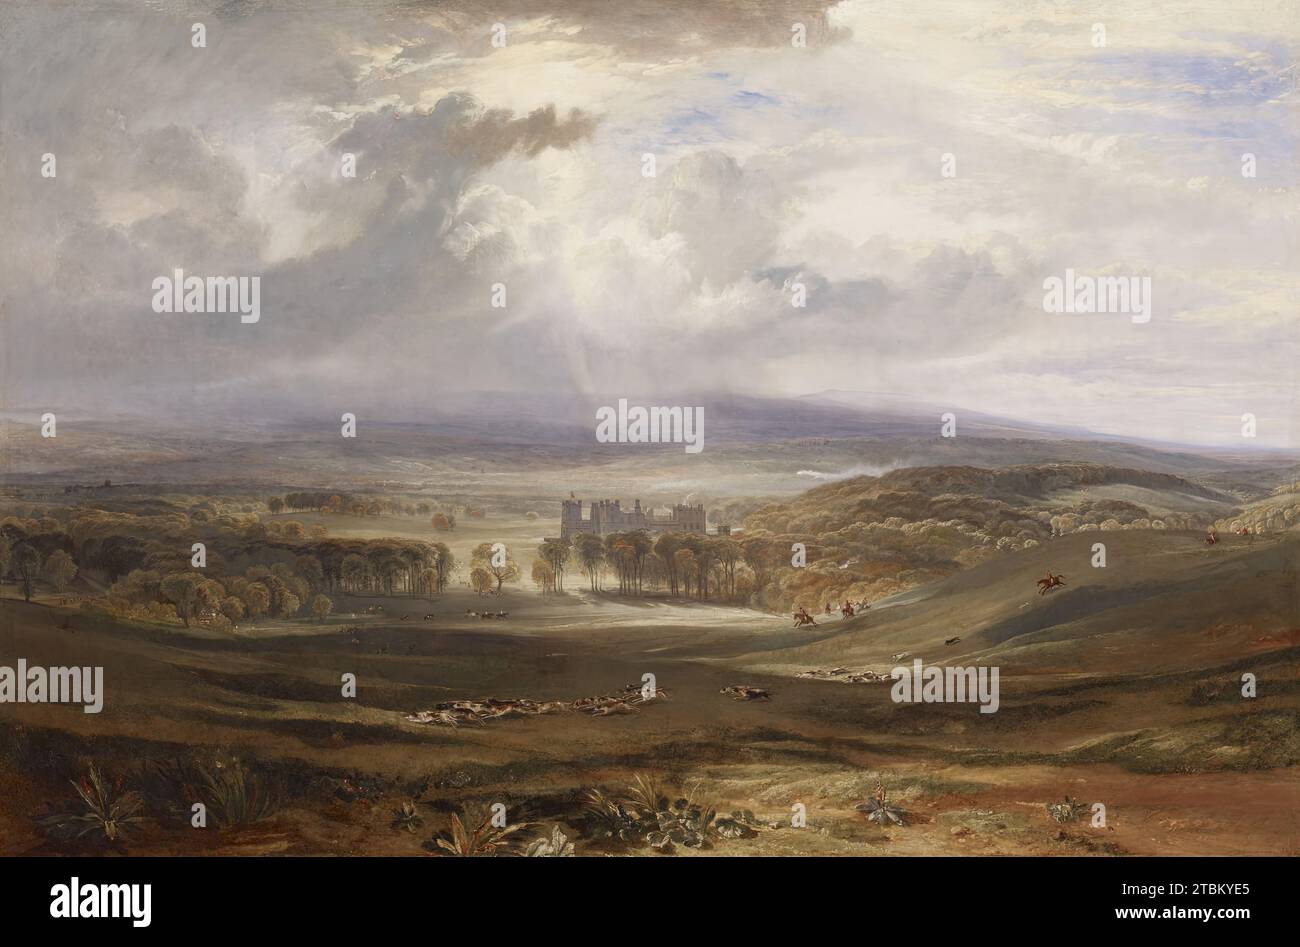 Raby Castle, the Seat of the Earl of Darlington, 1817. Before he painted Romantic subjects drawn from classical, biblical, literary, and contemporary sources, Turner specialized in topographical views. This work, commissioned by the third earl of Darlington, is one of Turner's most successful &quot;house portraits.&quot; It is also one of the first works in which he fully exploits the dramatic potential of the sky. The earl, an avid sportsman who reportedly hunted six days a week, may have influenced Turner's rendering of the scene. When the painting was first exhibited at the Royal Academy in Stock Photo